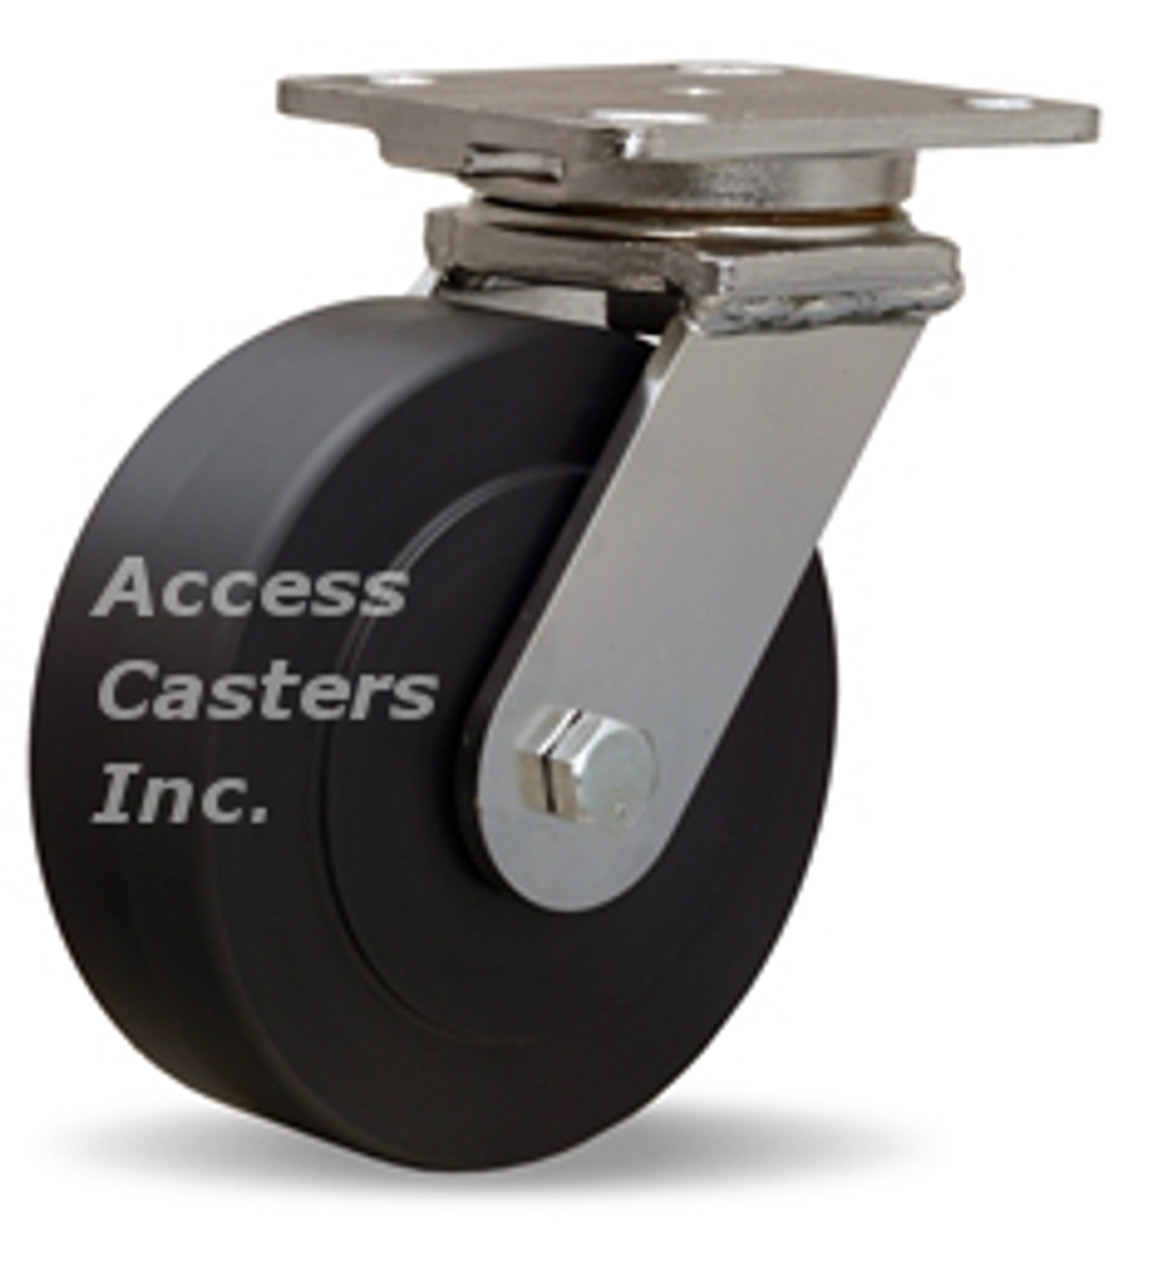 S-WHS-6NYSB 6 Inch Workhorse Stainless Steel Swivel Caster